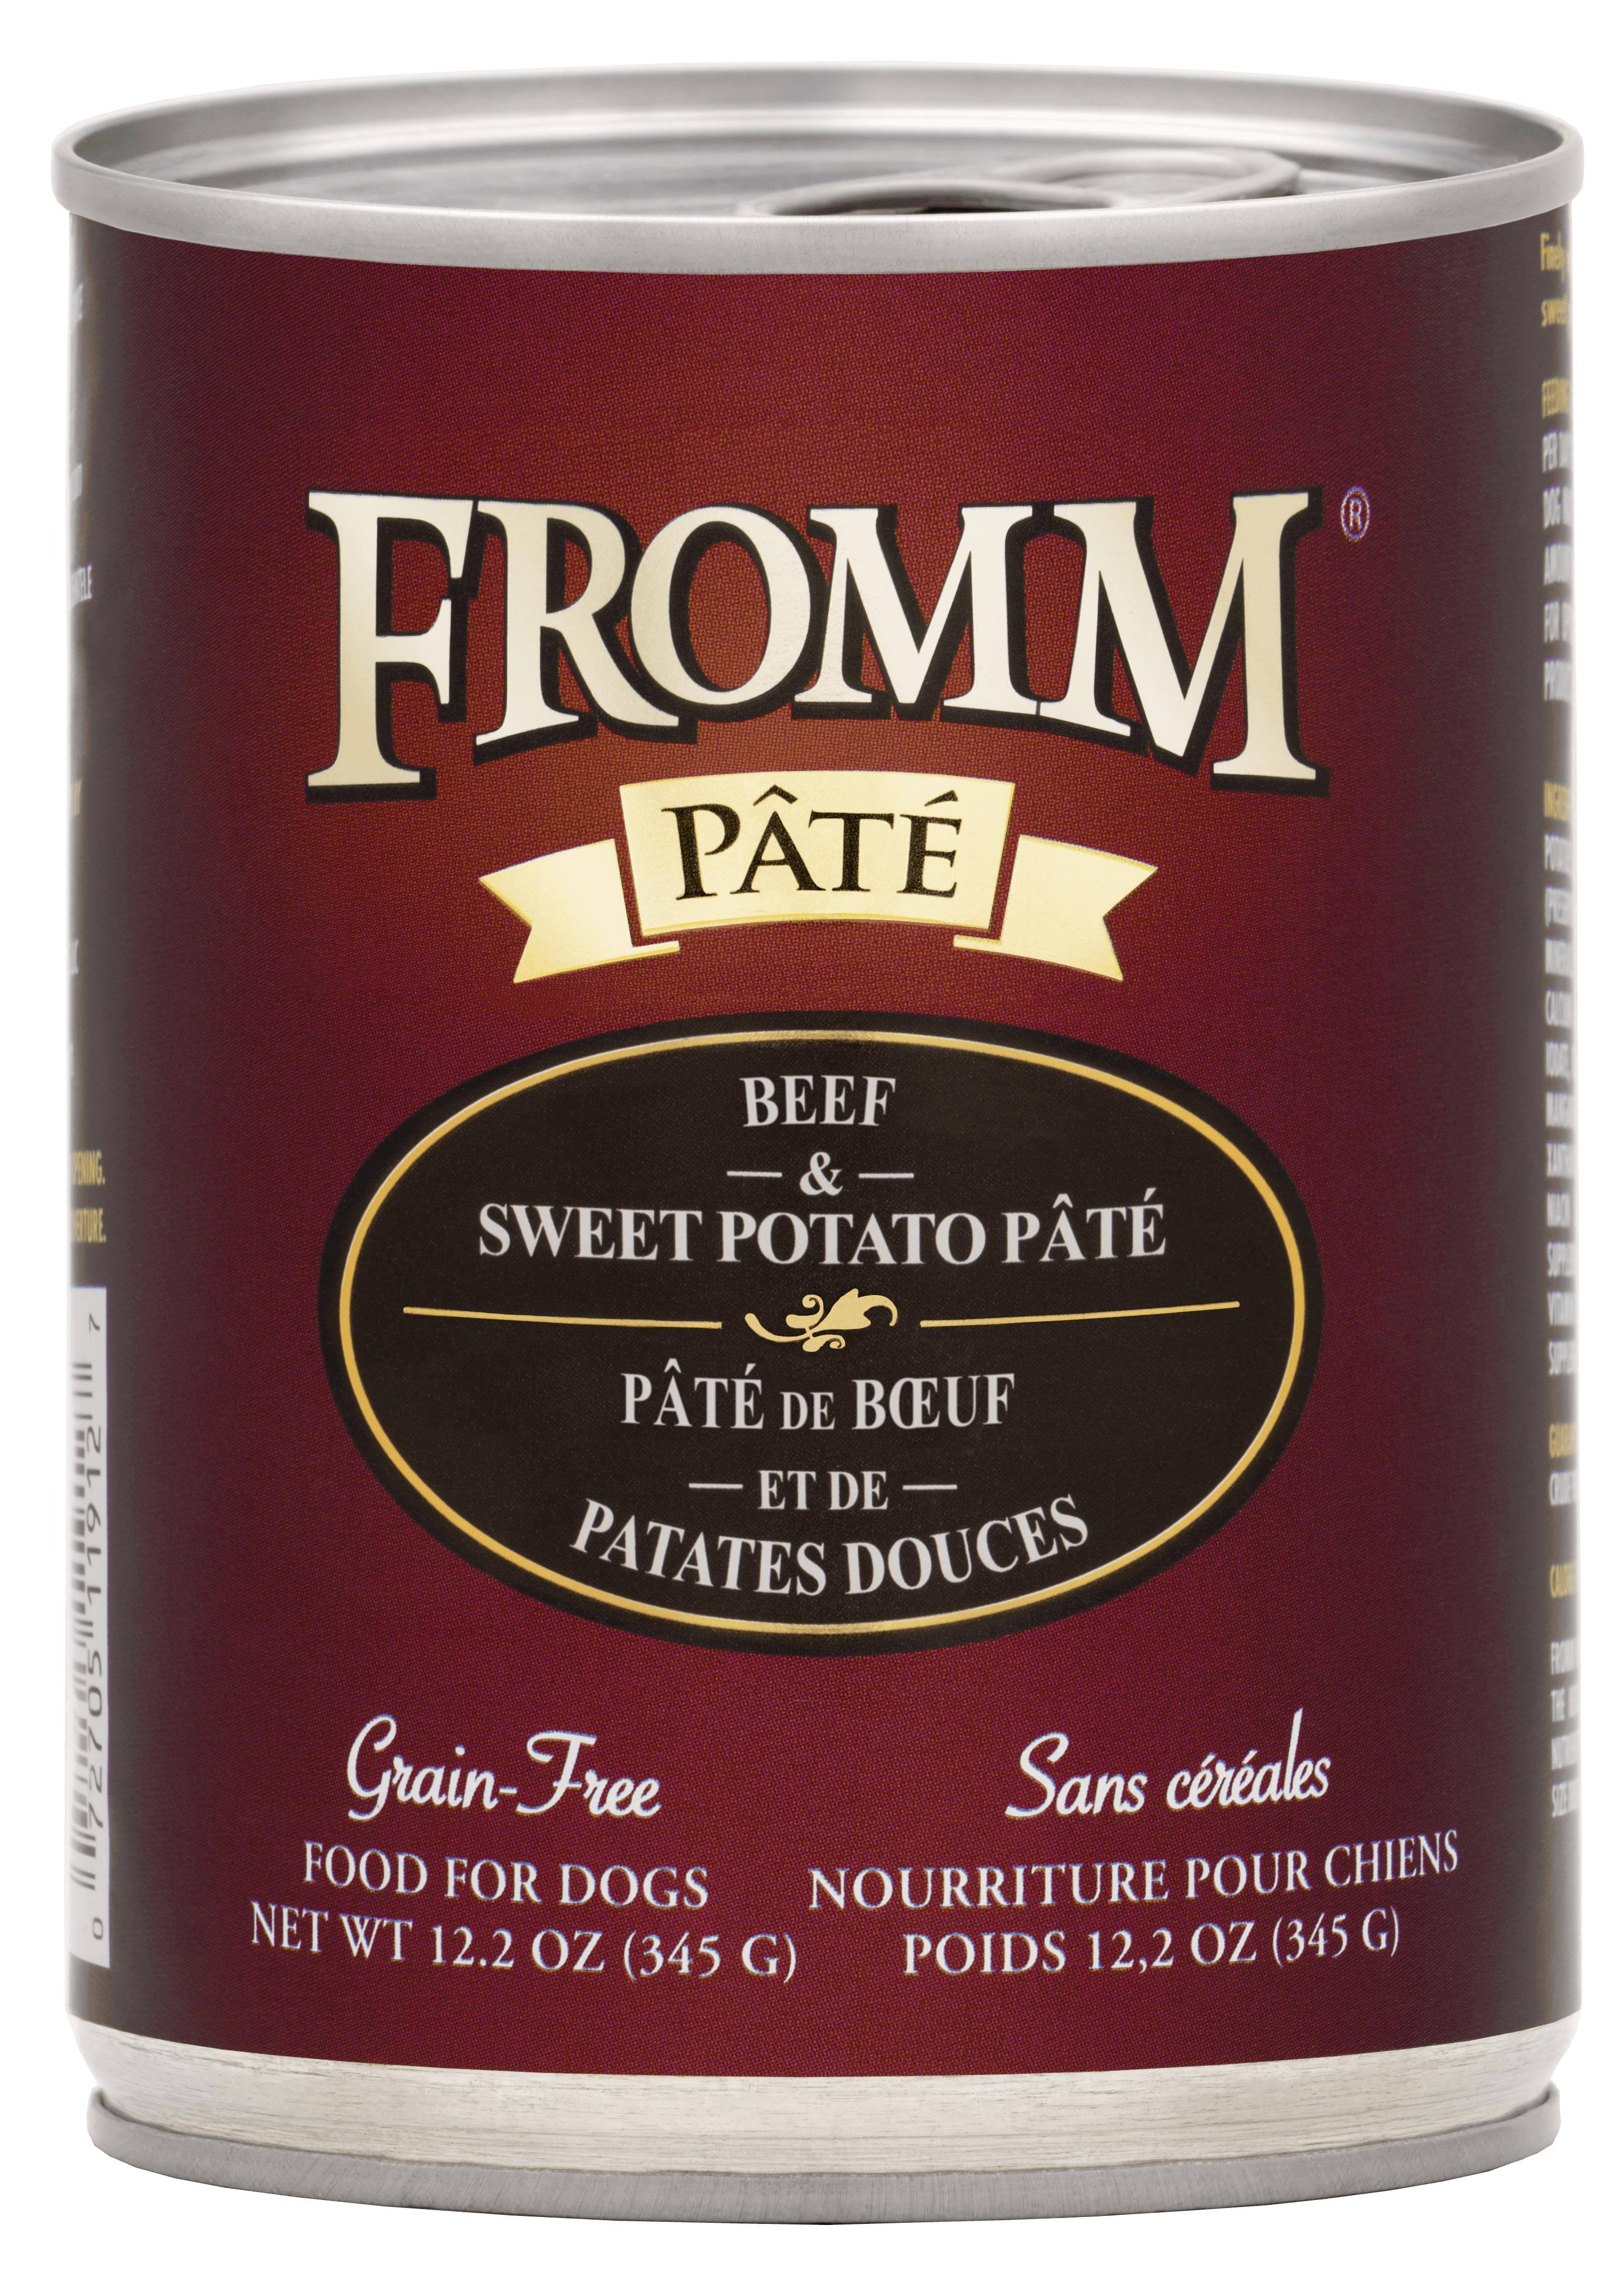 Fromm Beef & Sweet Potato Pate Grain Free Canned Dog Food - 12.2 oz, Case of 12